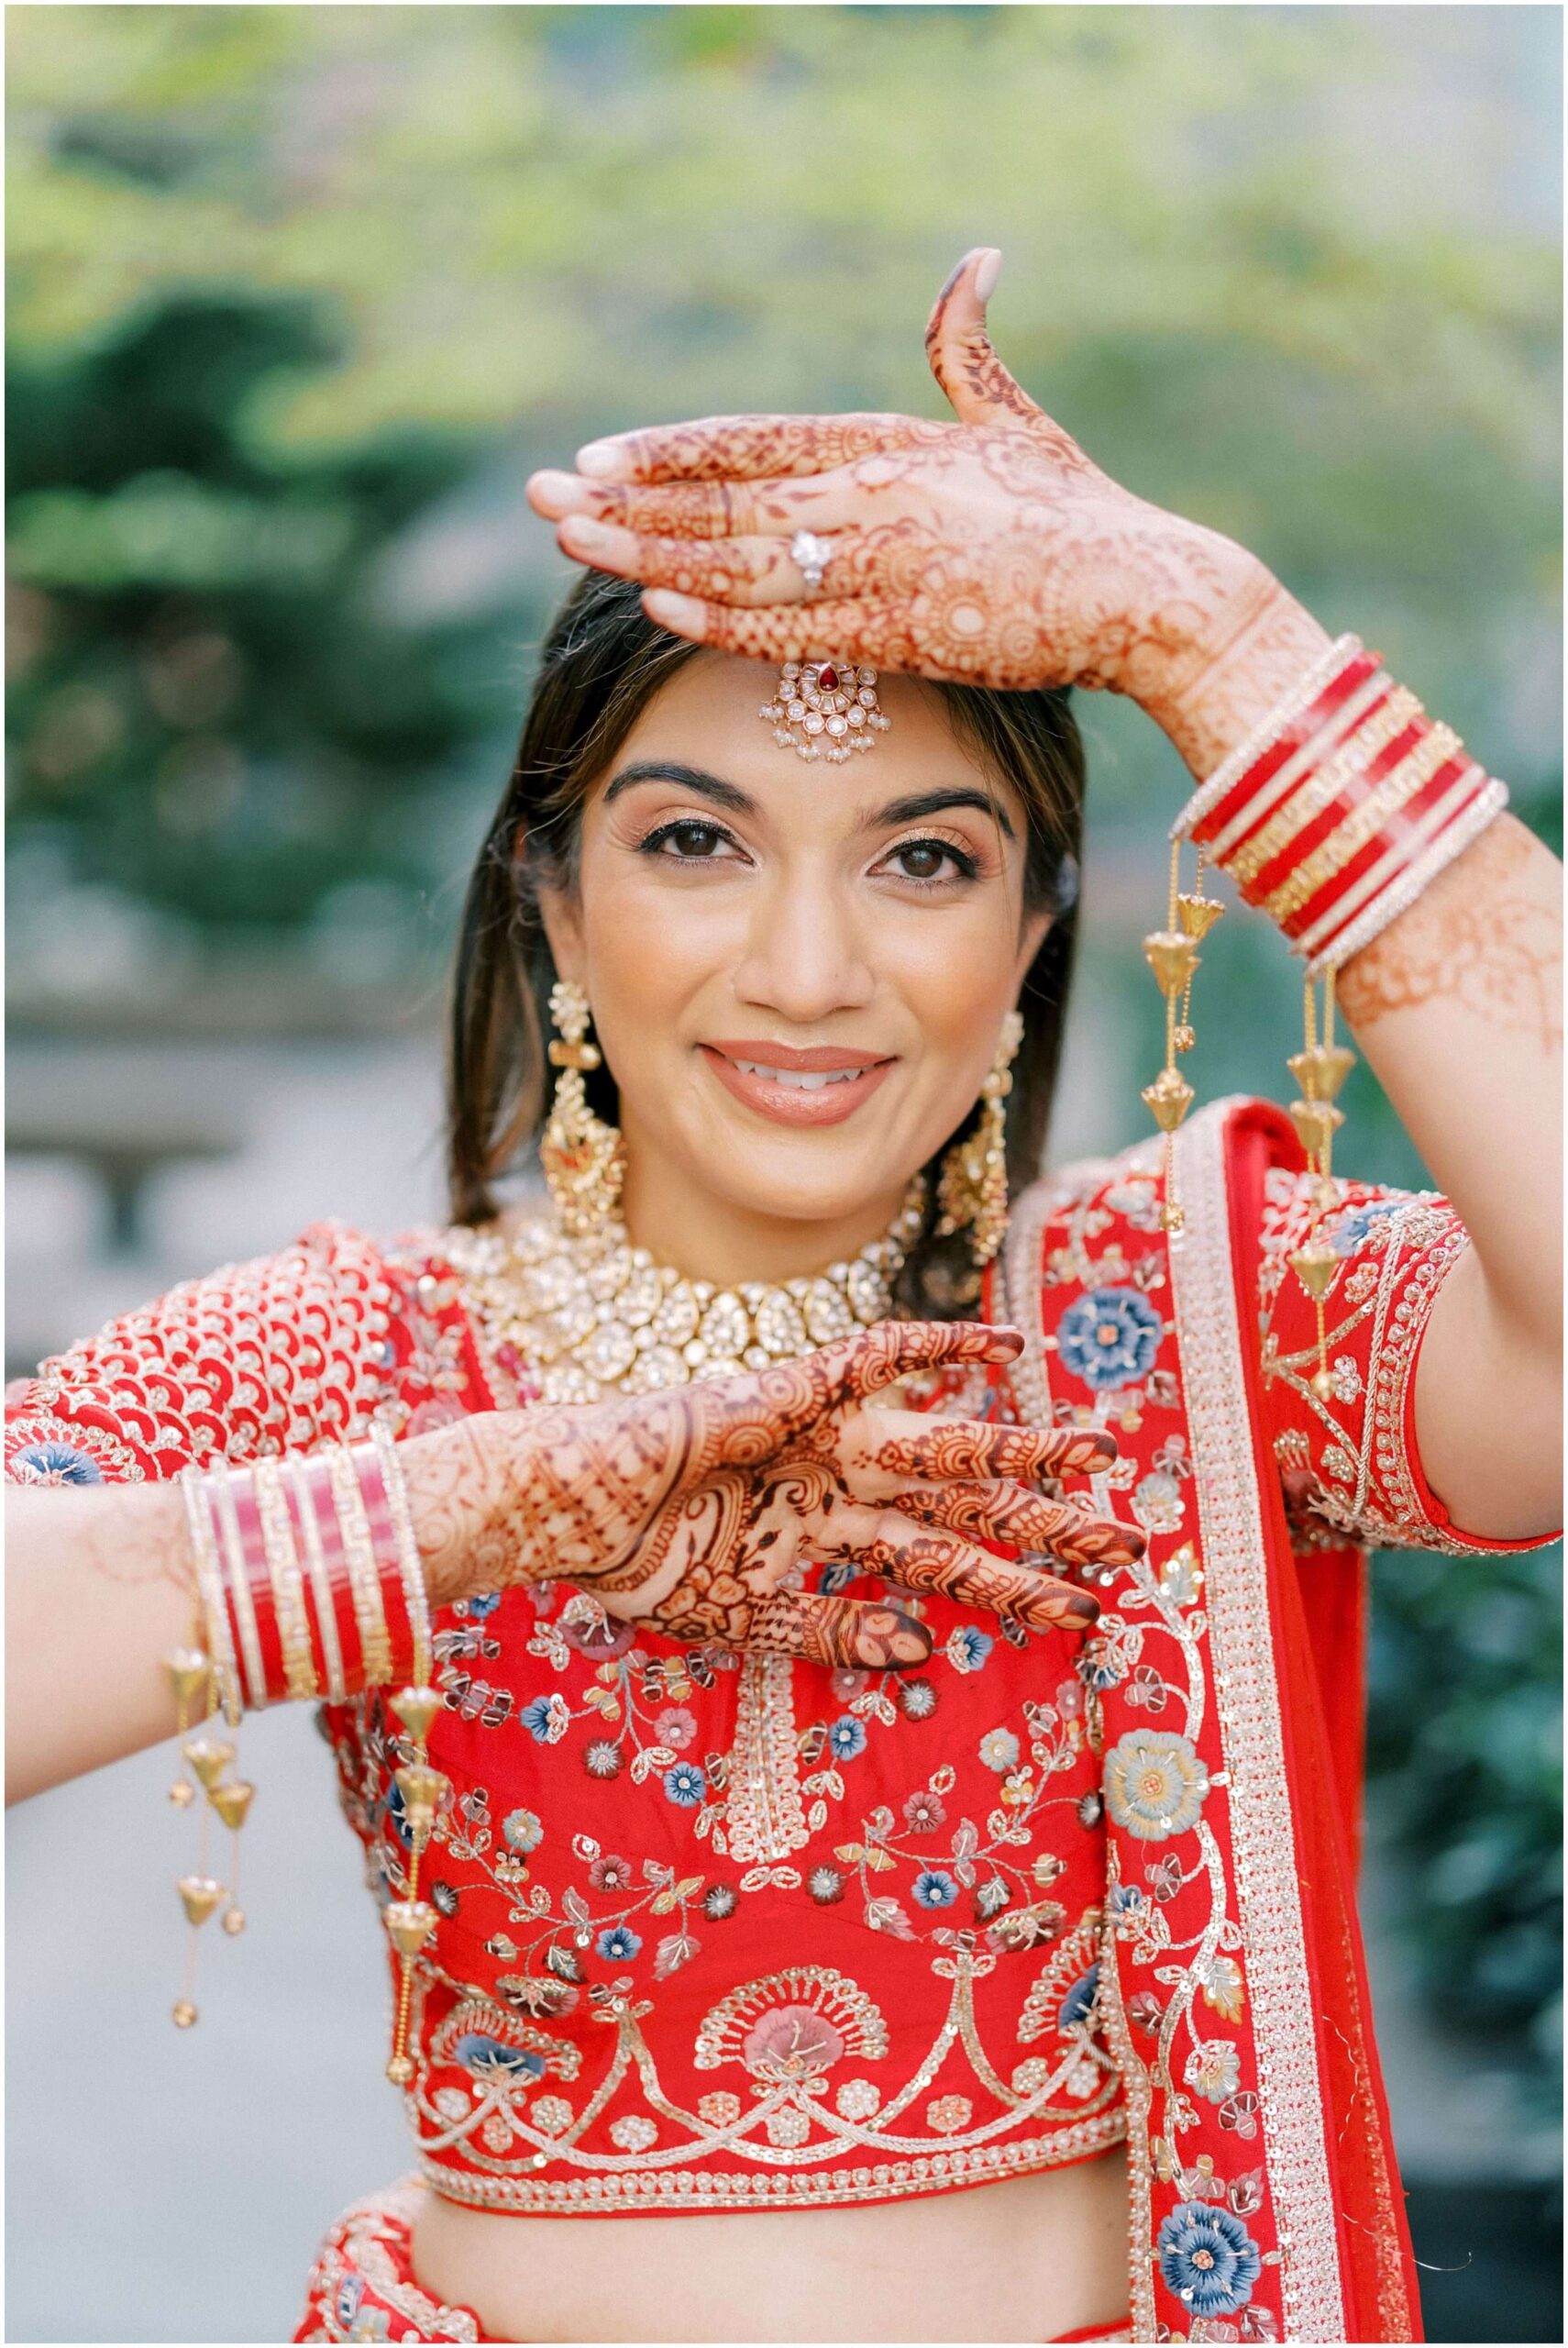 Bride in Indian wedding attire. Photographed by fusion wedding photographer Winnie Dora Photography.